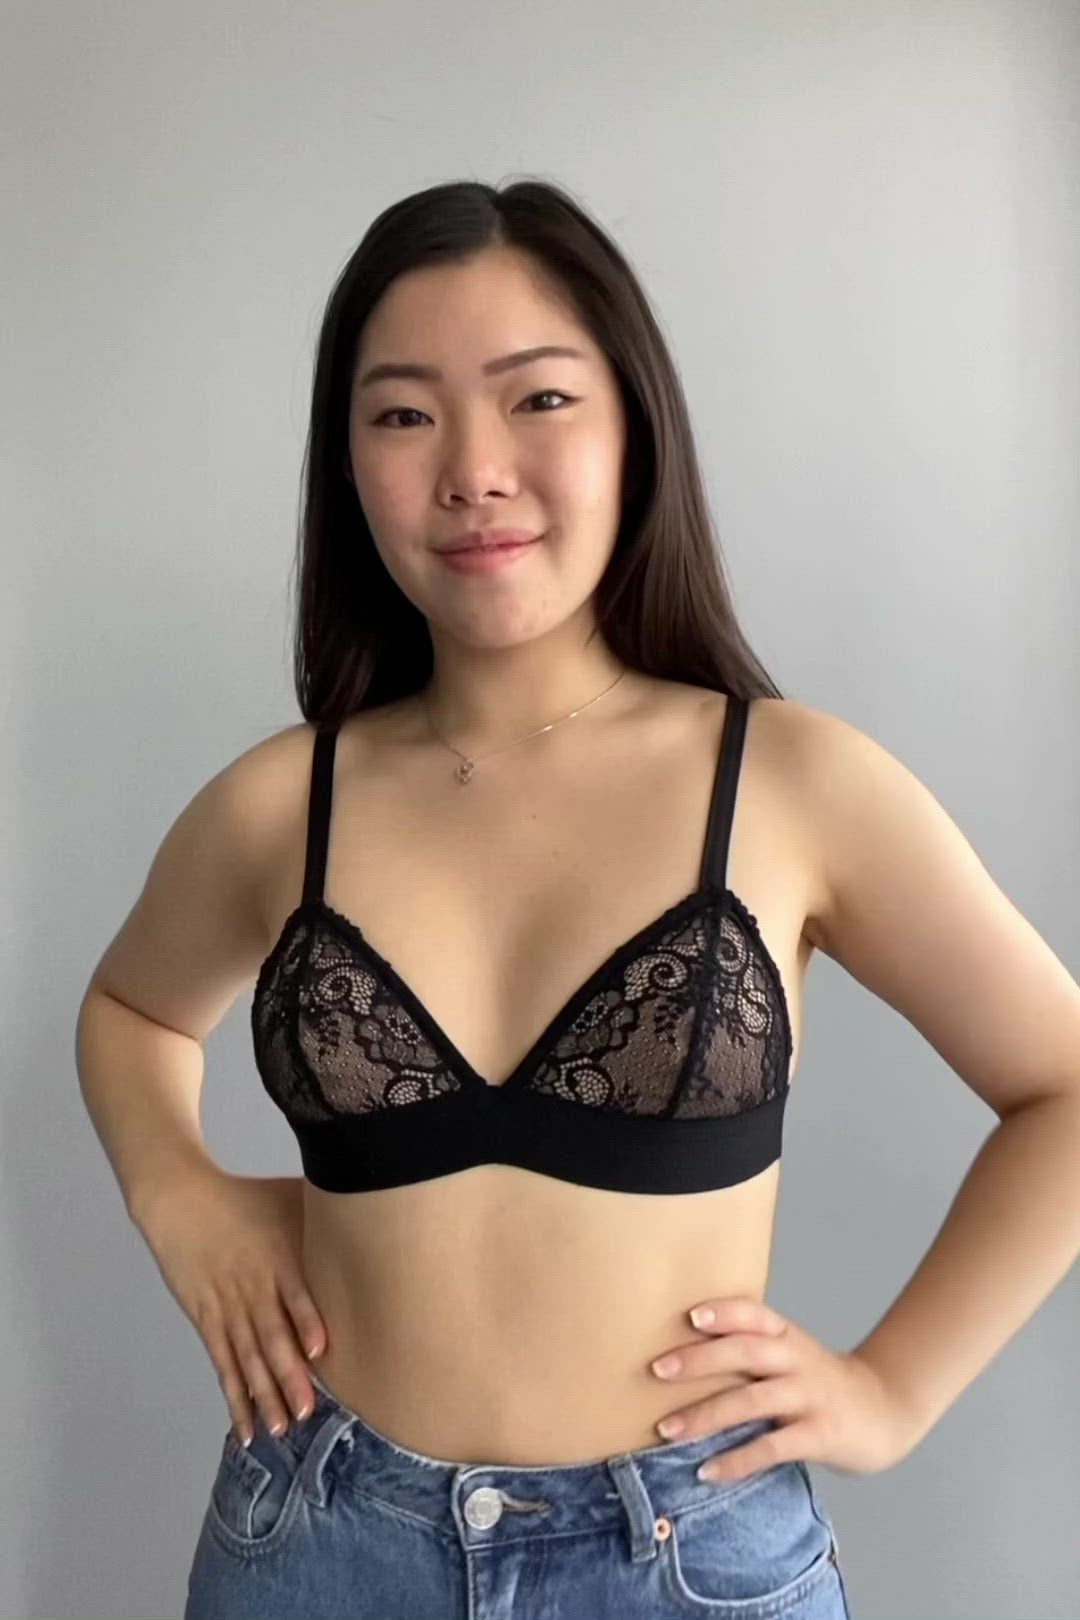 Petite Lace Bra Made for Small Busts and Small Breasts.